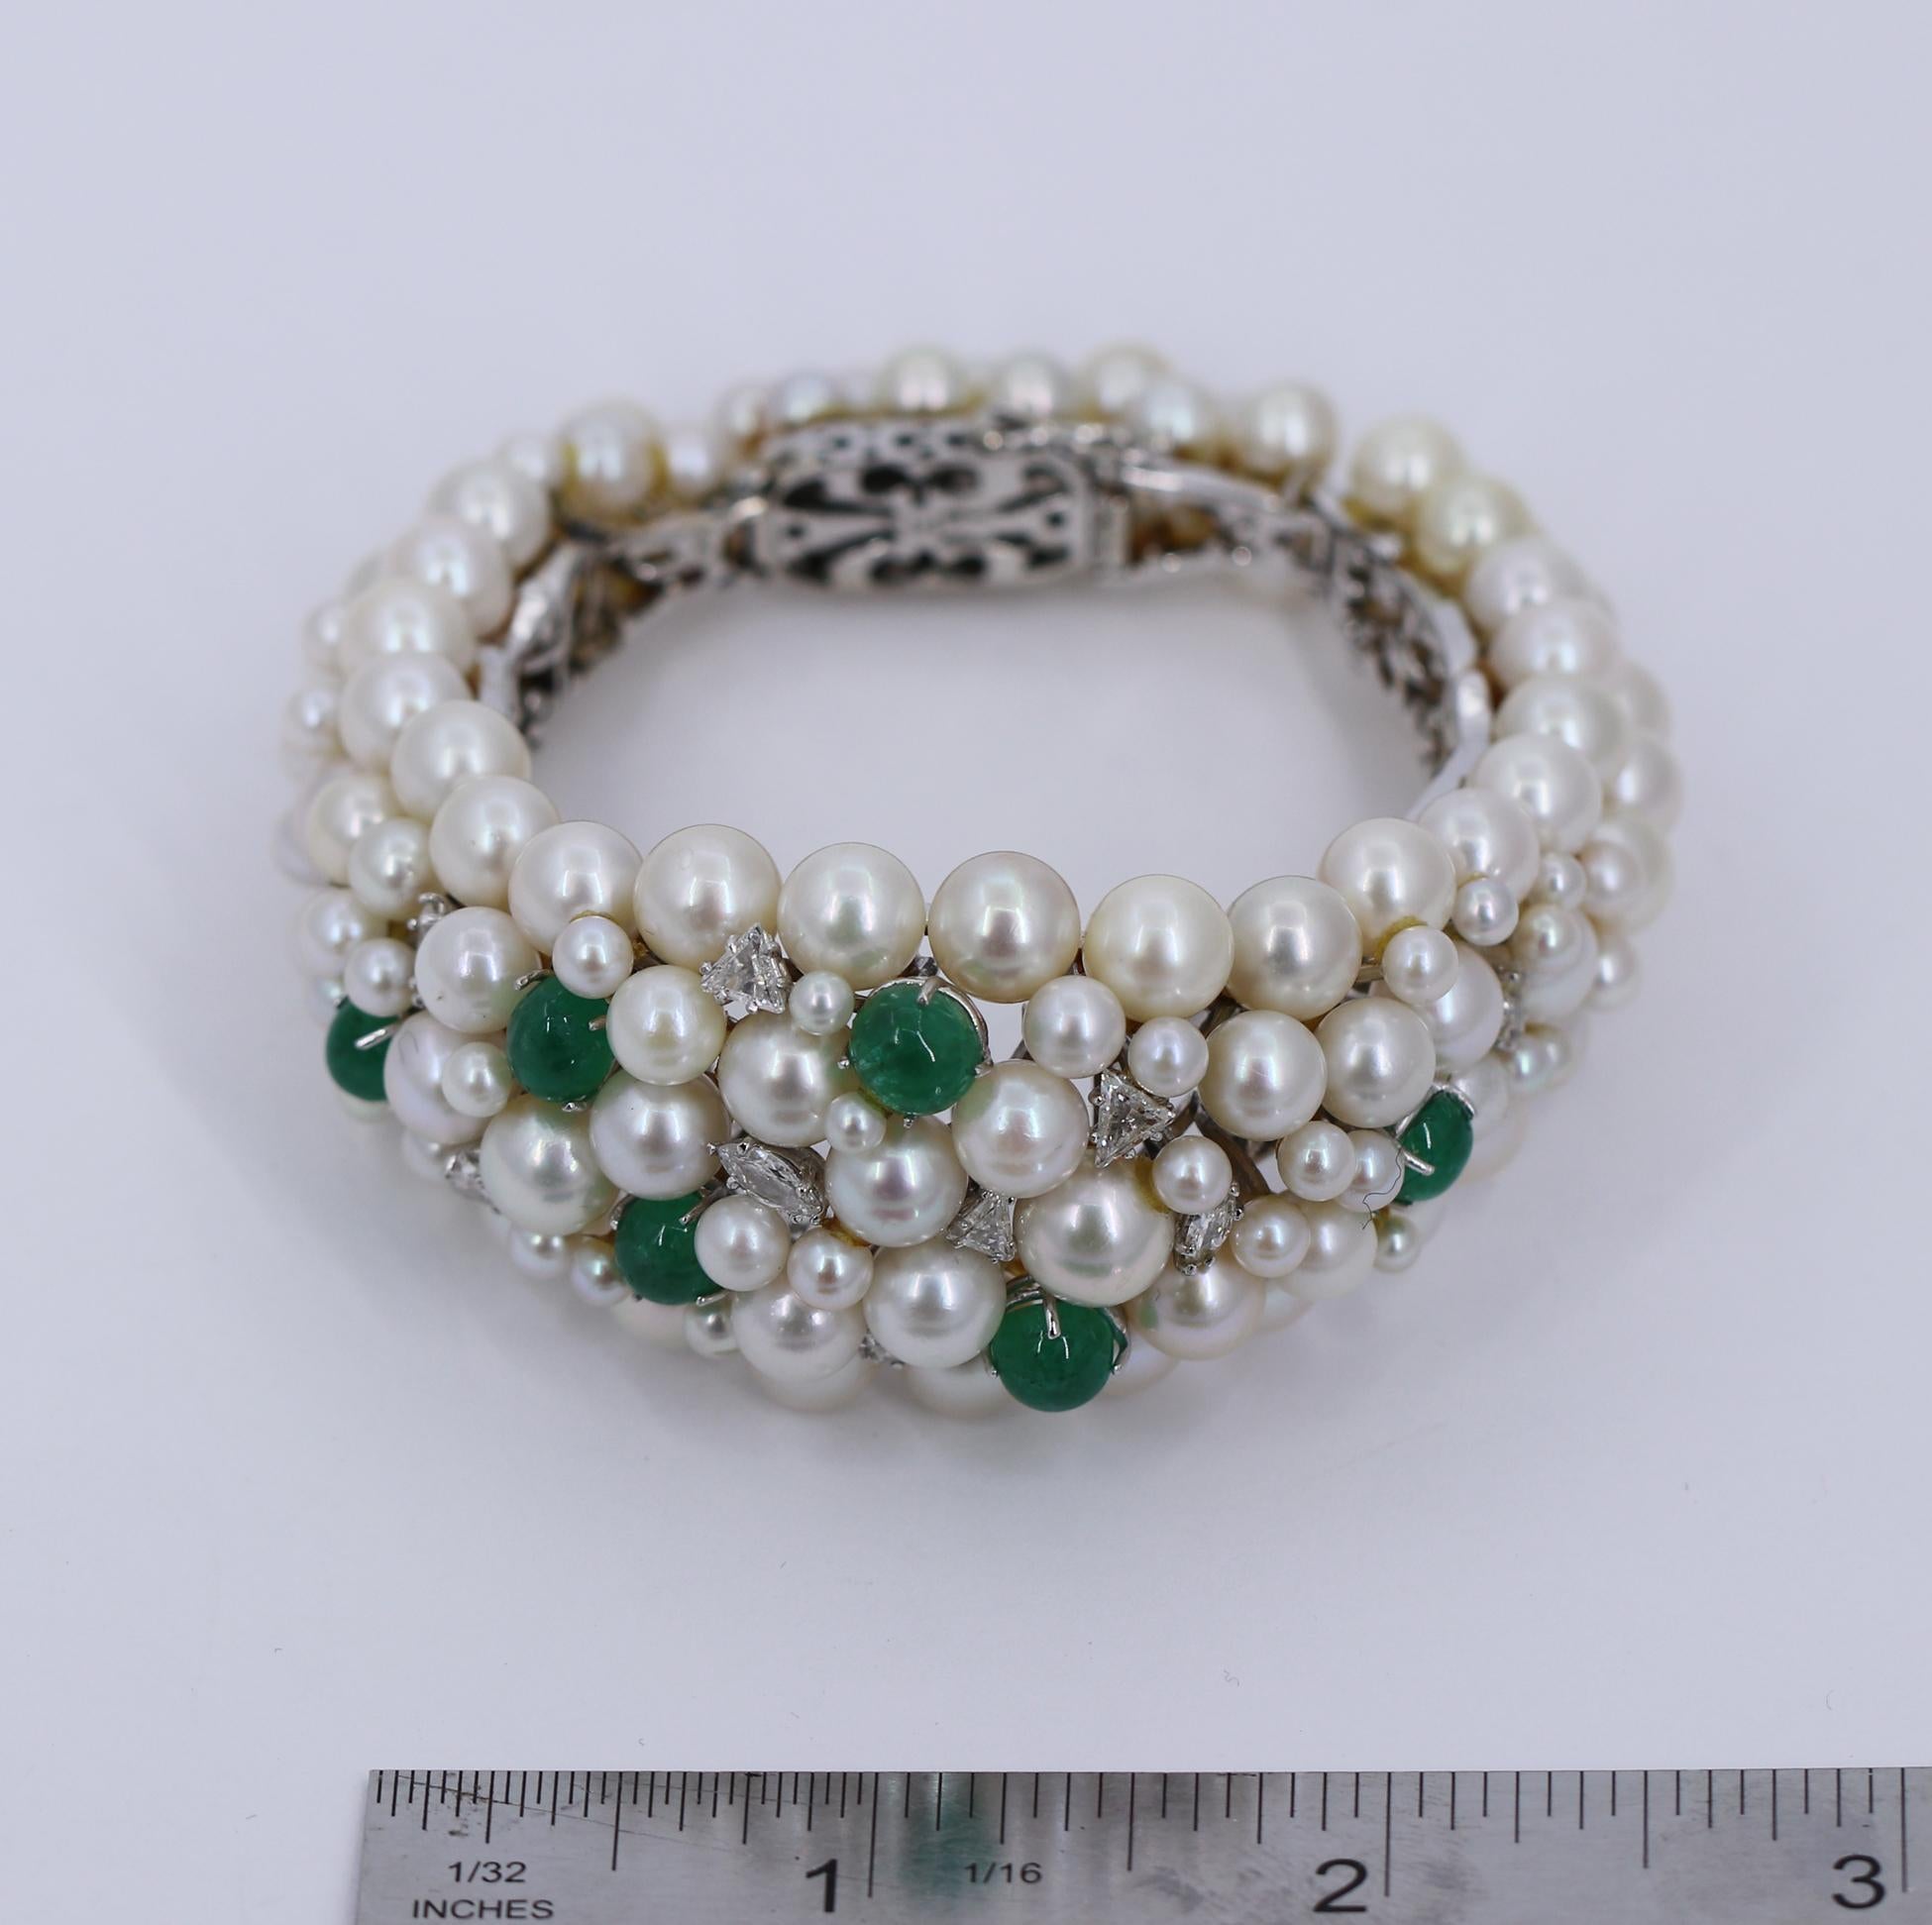 Midcentury White Gold Bracelet with Diamonds Emeralds and Pearls 2